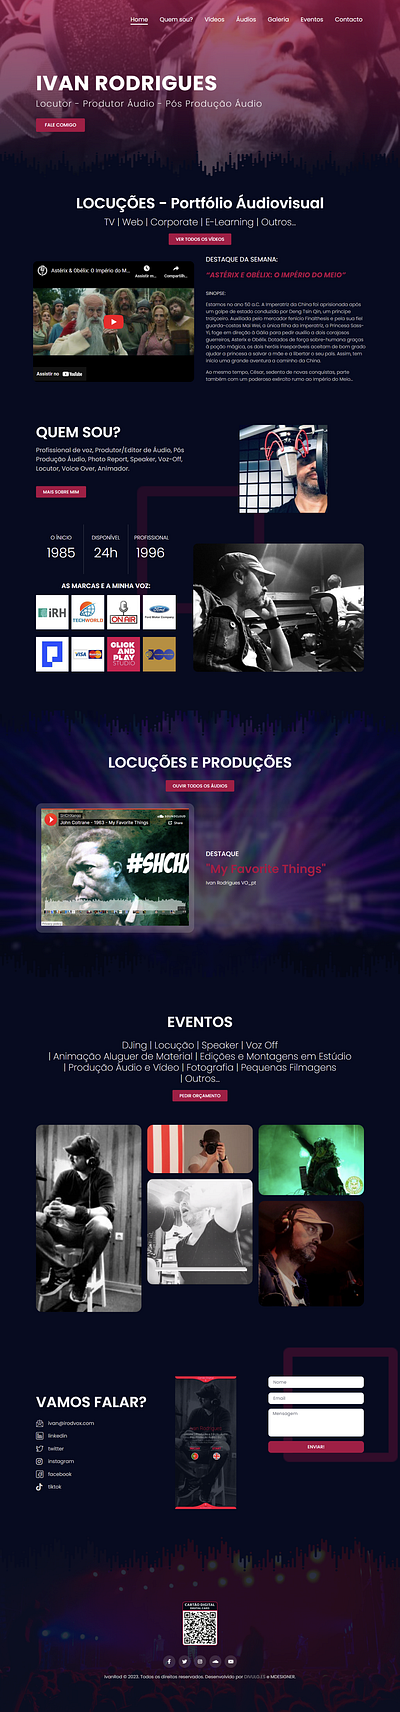 Ivan Rodrigues Home Page - Website for Portugal elementor pro landing page site wordpress